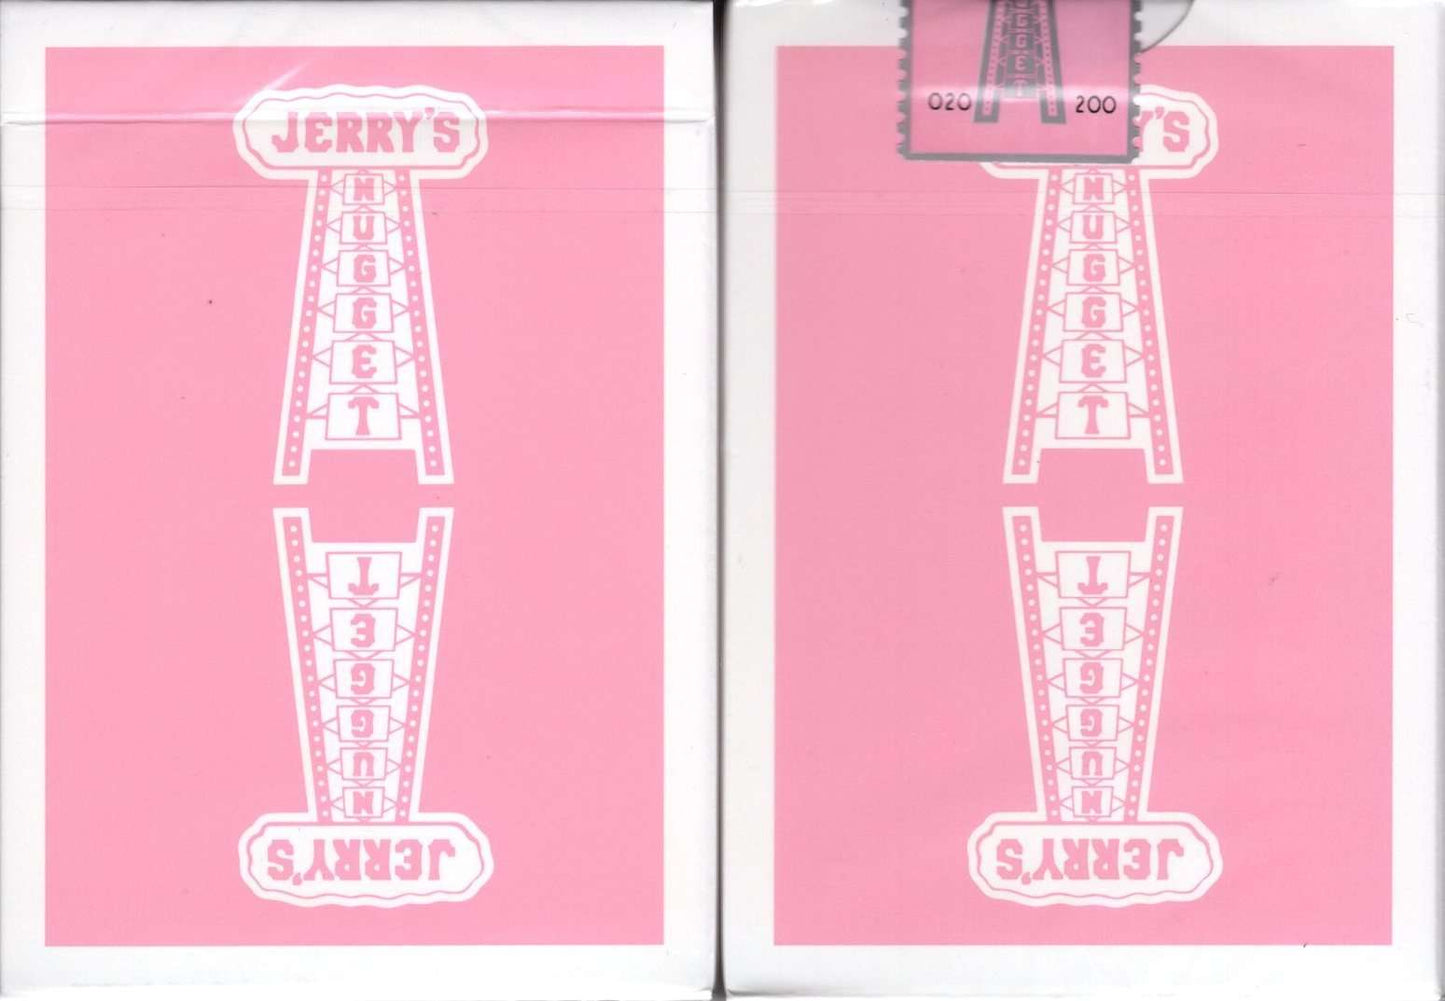 PlayingCardDecks.com-Modern Feel Jerry's Nugget v2 Rose Pink Gilded Playing Cards USPCC